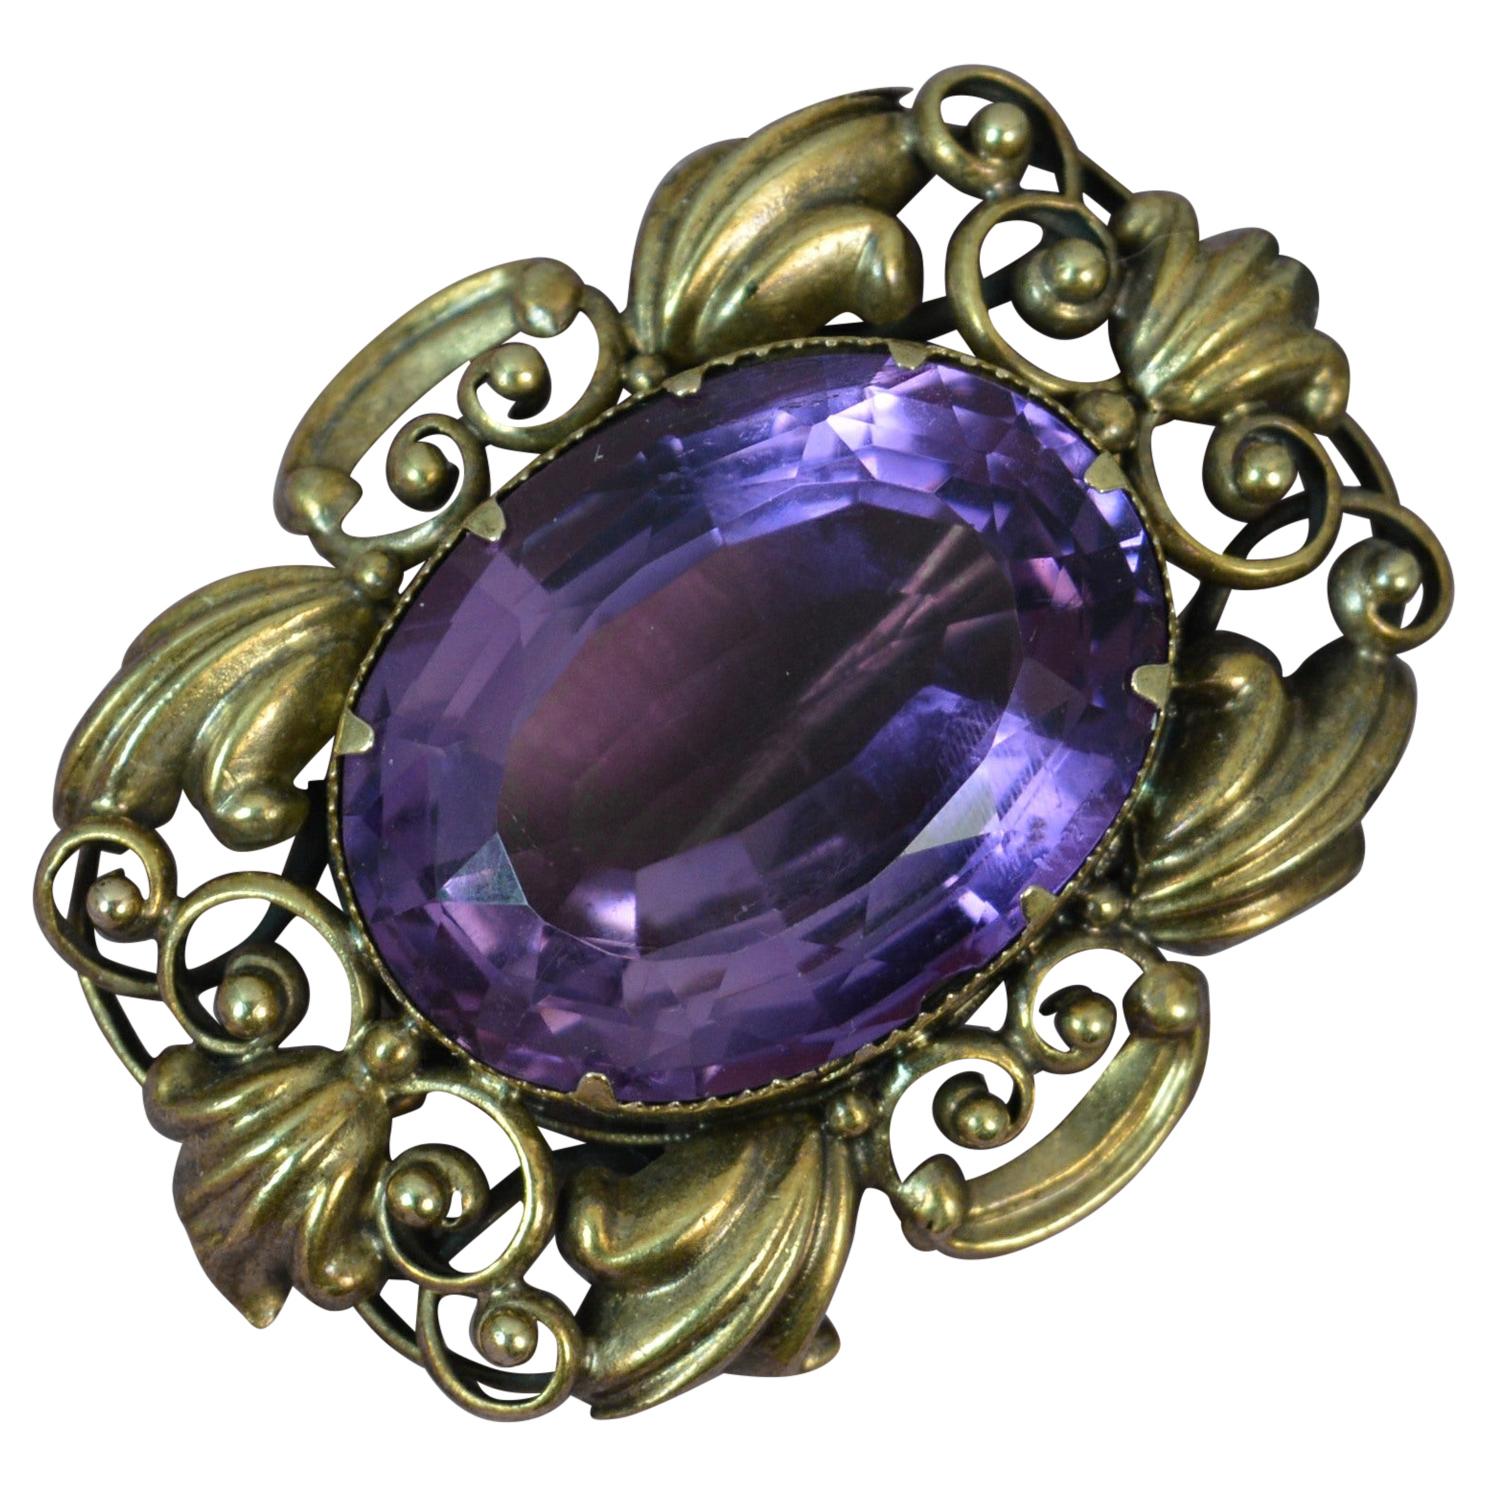 Early Victorian 15 Carat Gold and Amethyst Statement Brooch